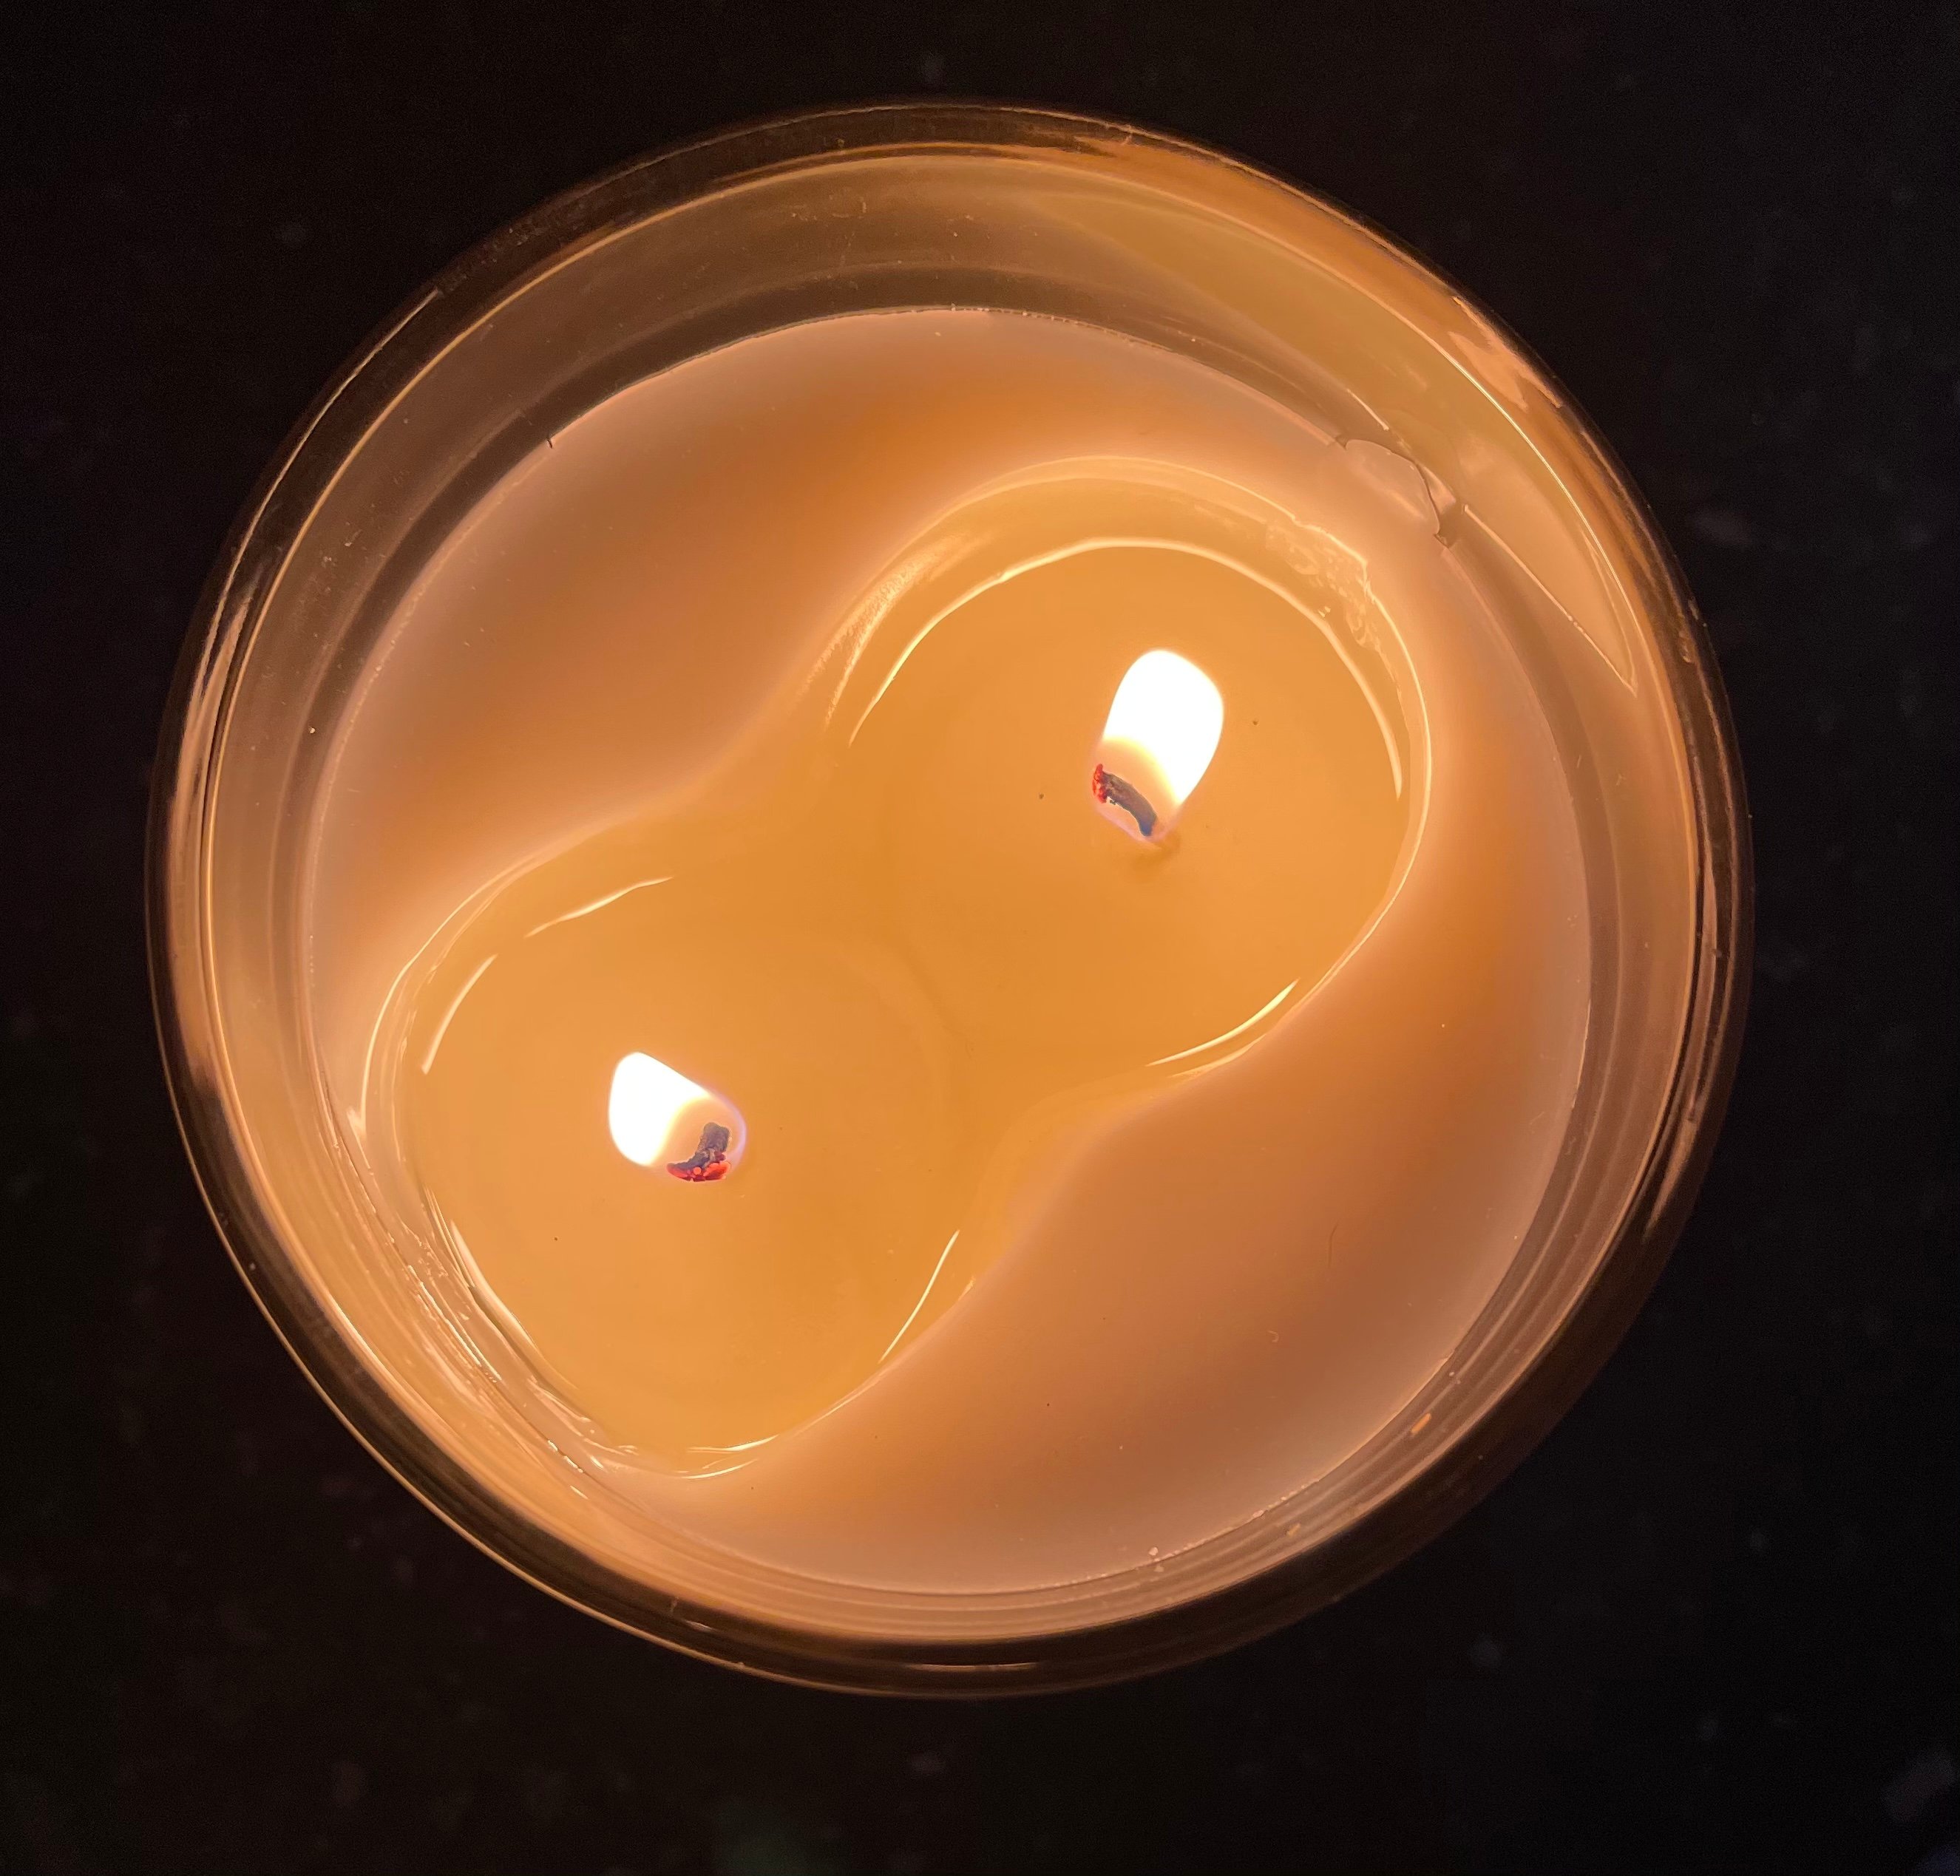 A burning twin-flame candle | Source: Shutterstock